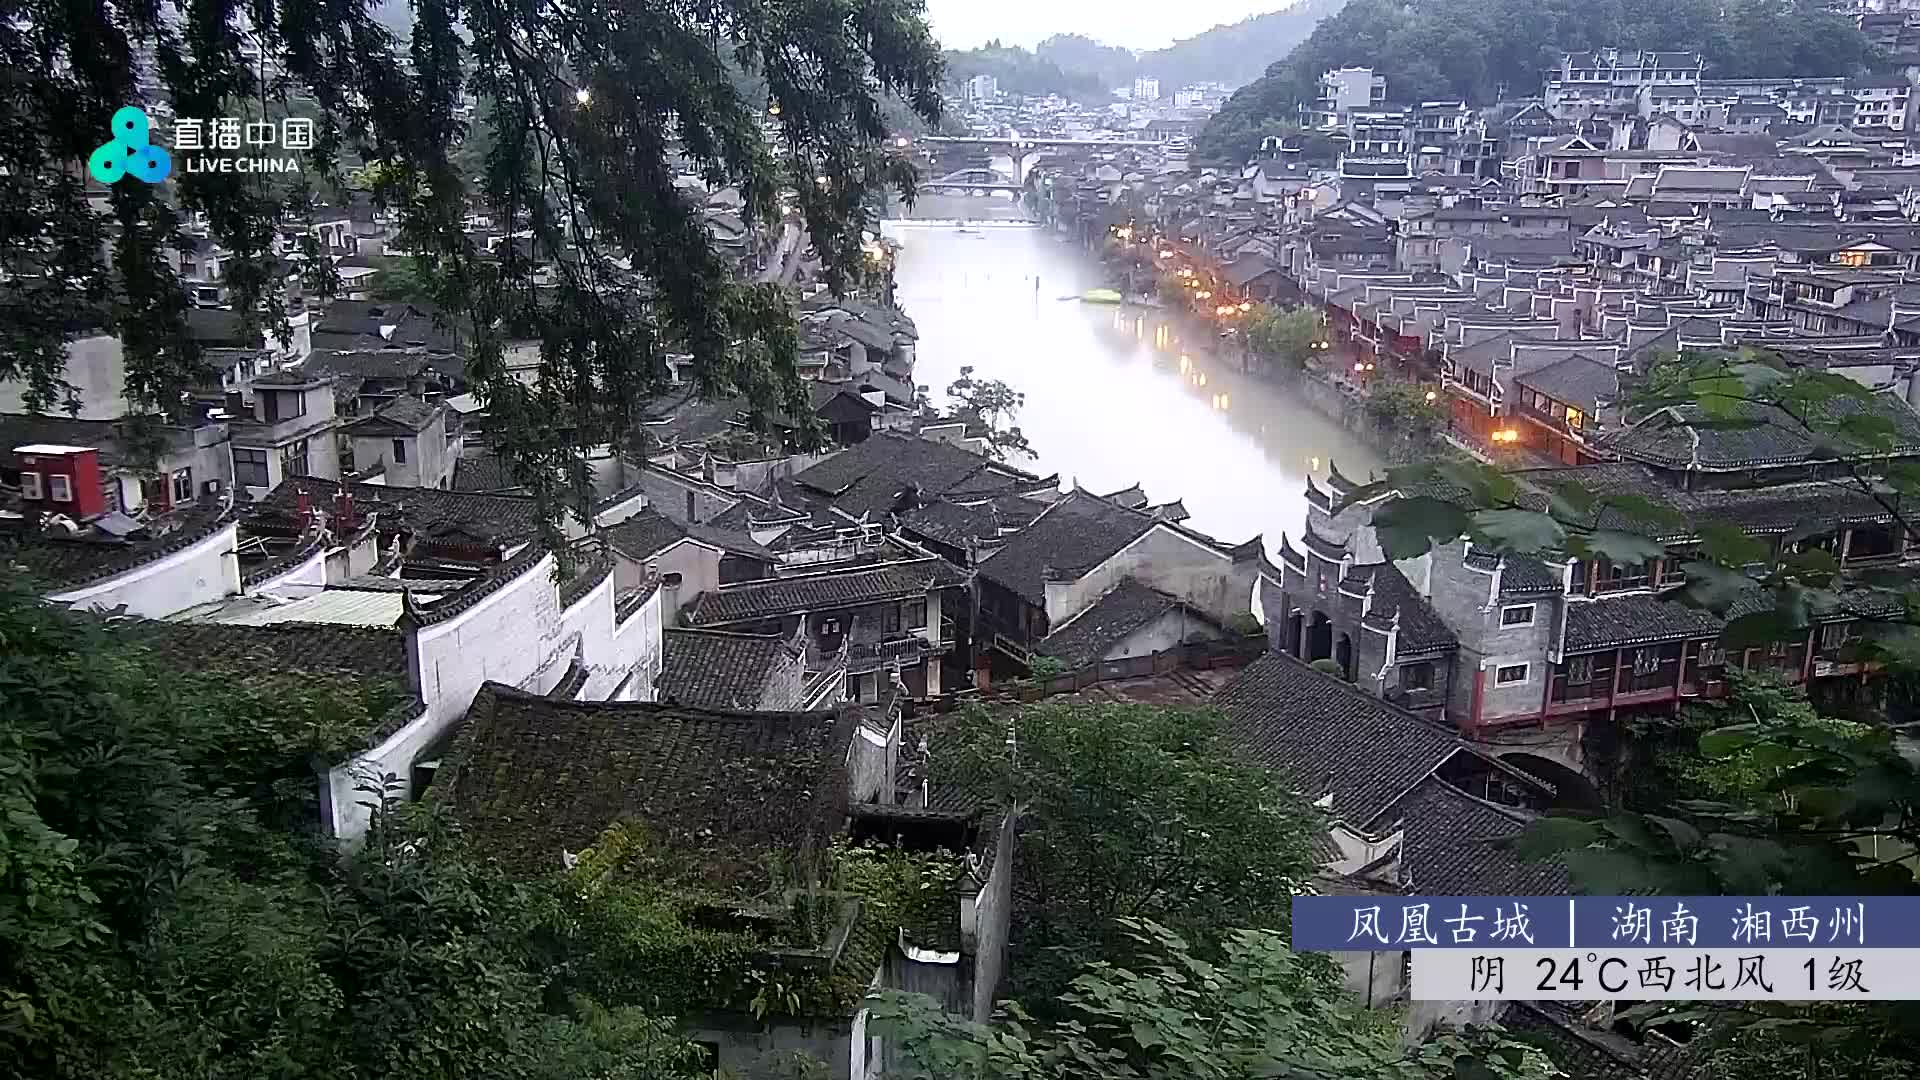 Fenghuang Dom. 05:48